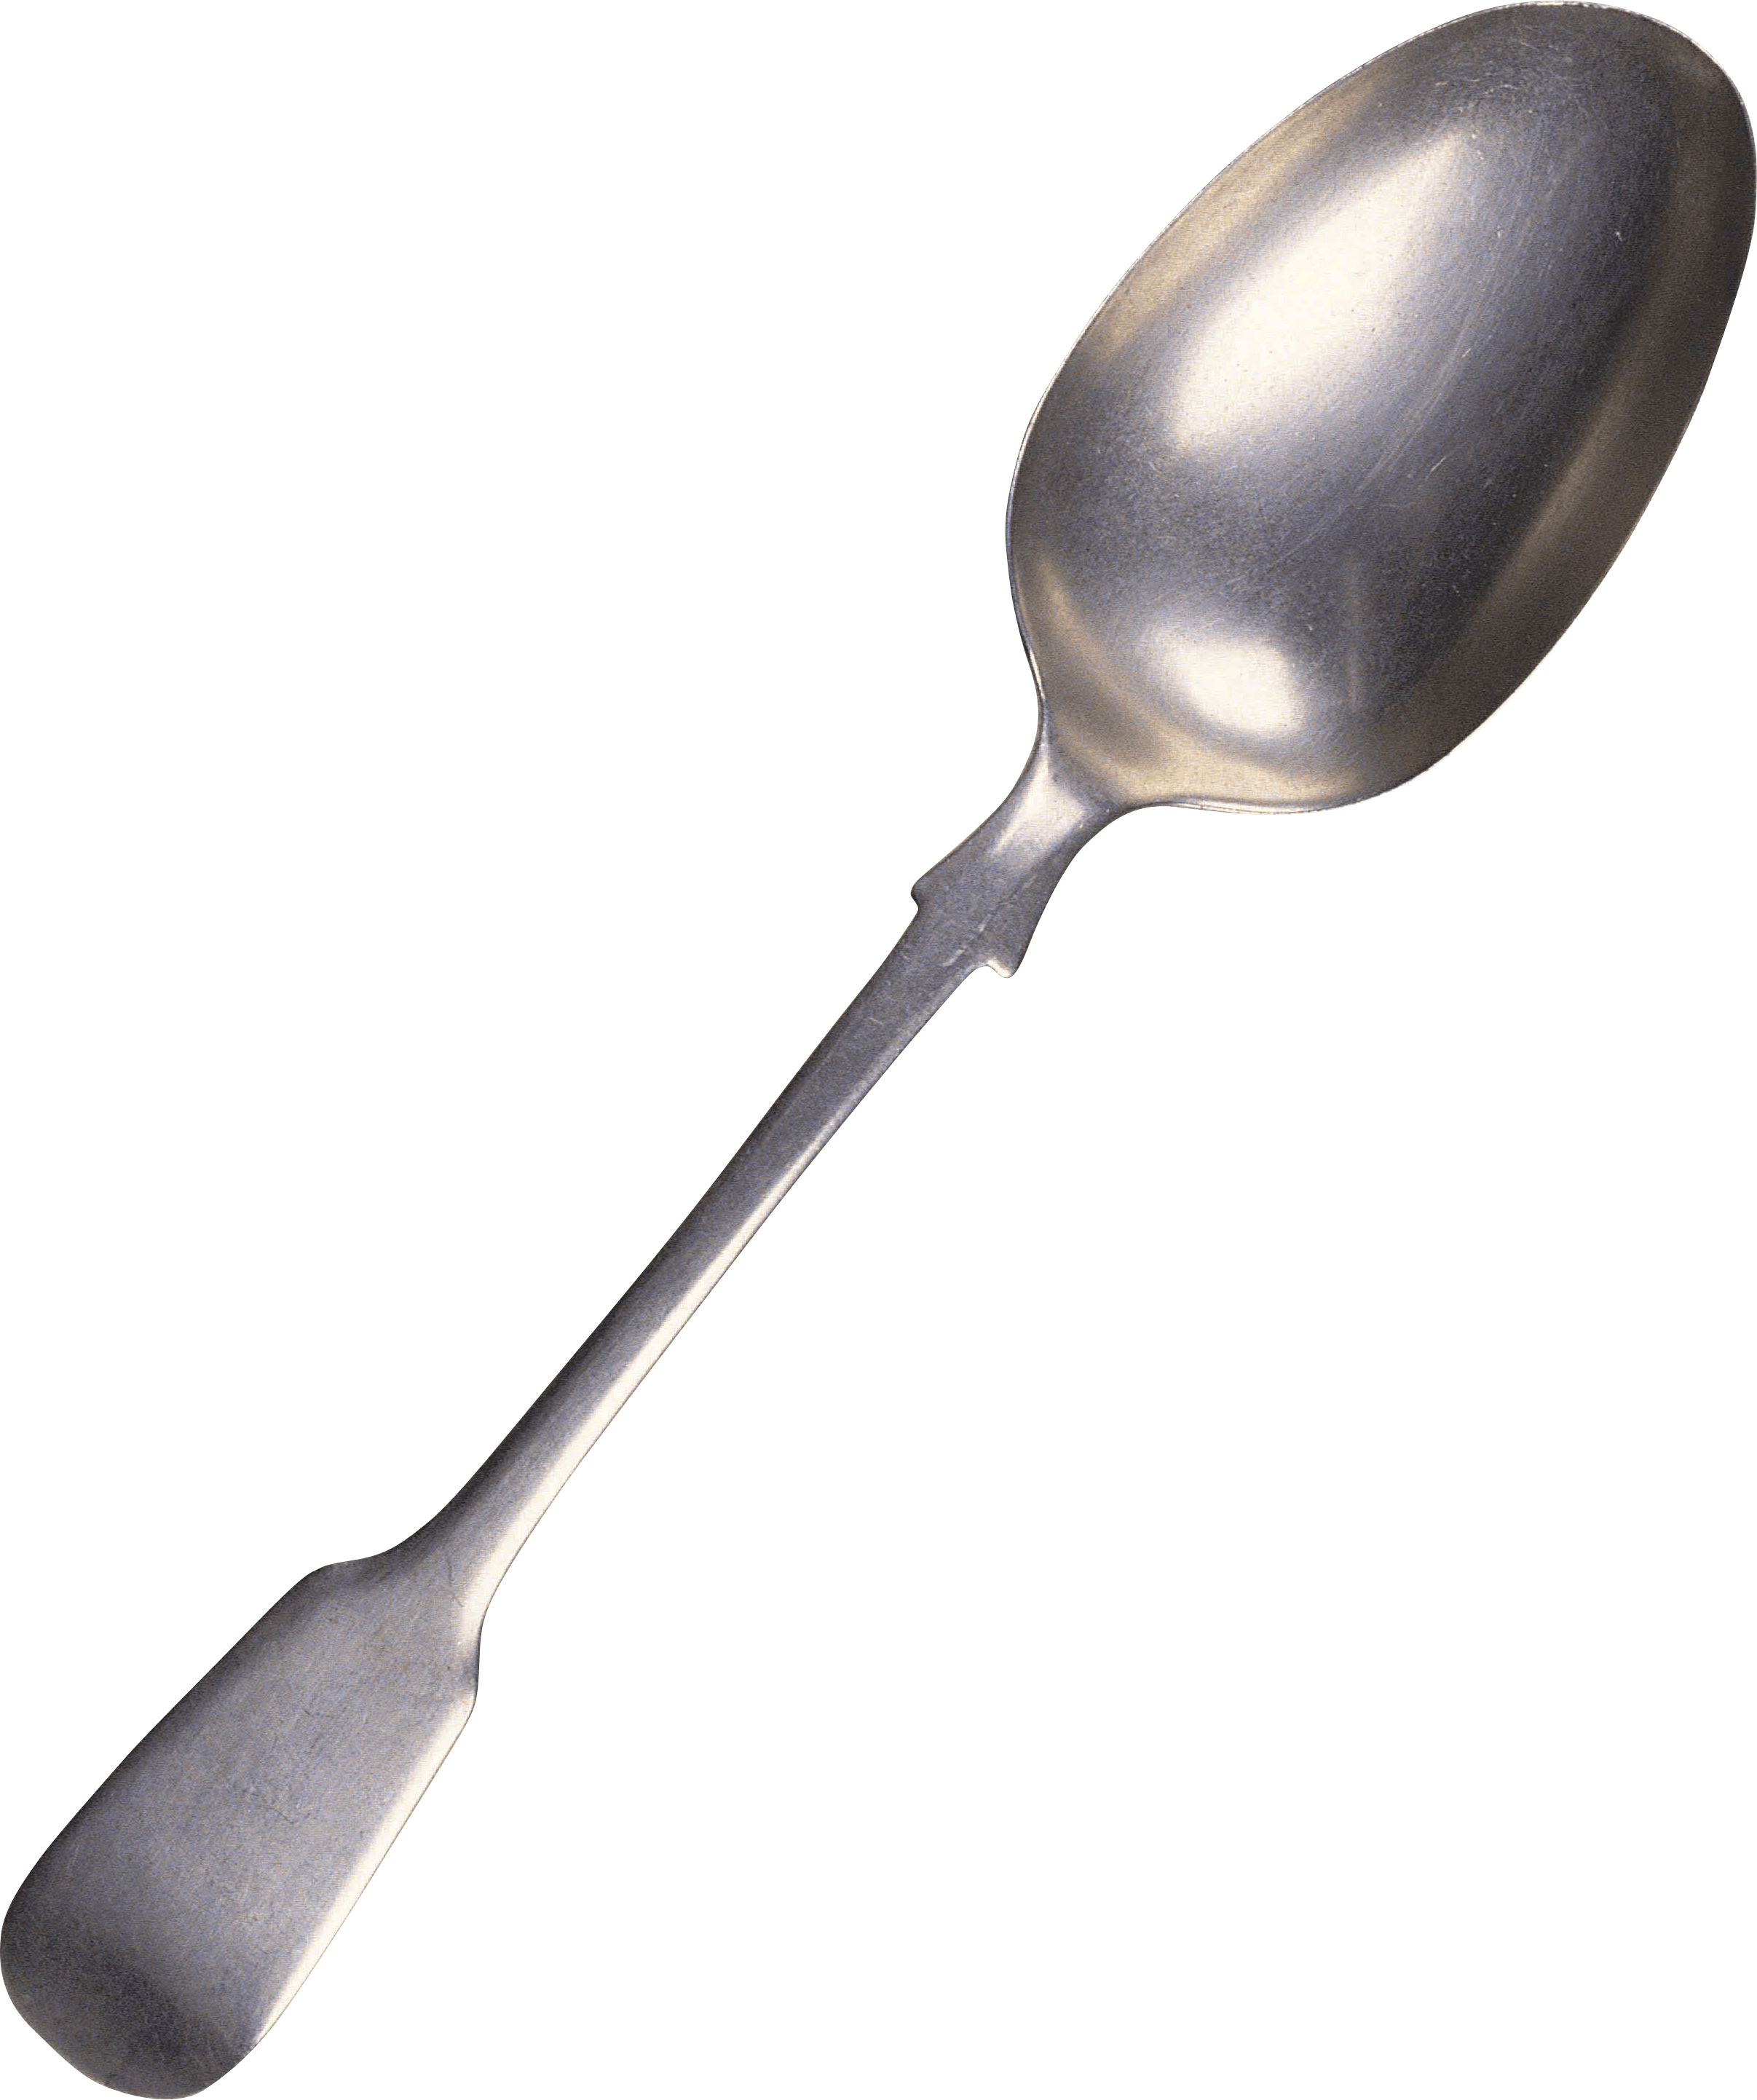 Old Spoon png icons